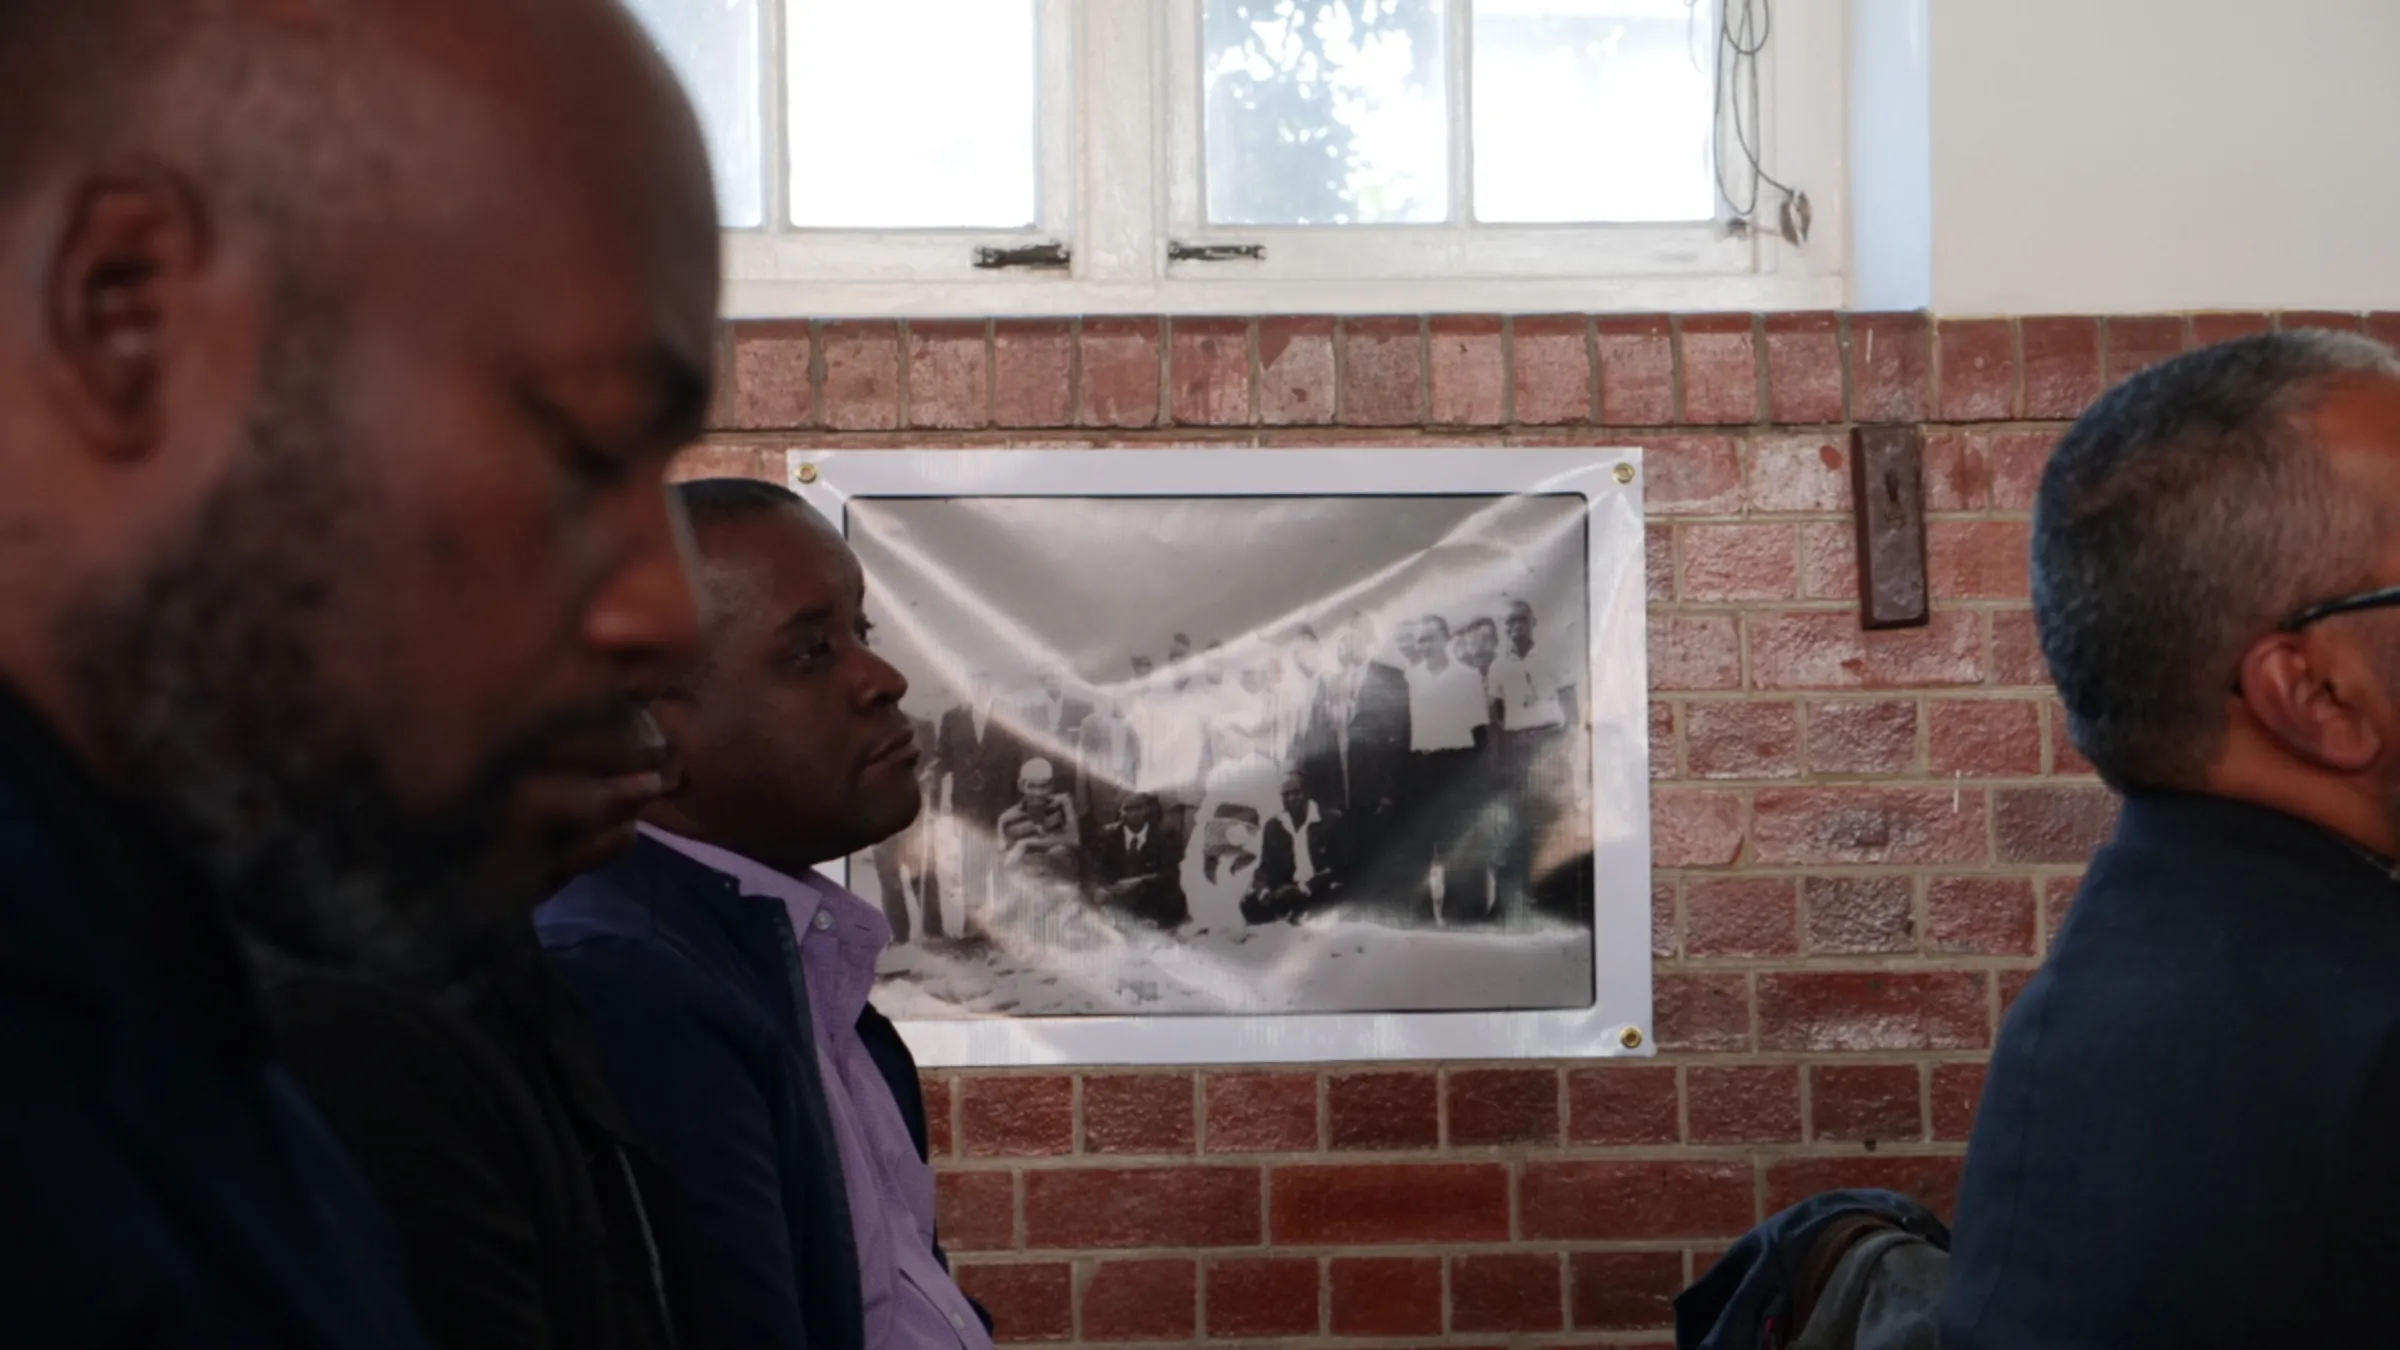 Attendees seated in front of an image of some of the first freed Amakua slaves brought to South Africa by the British, presented at a conference in Durban, South Africa, August 7, 2023